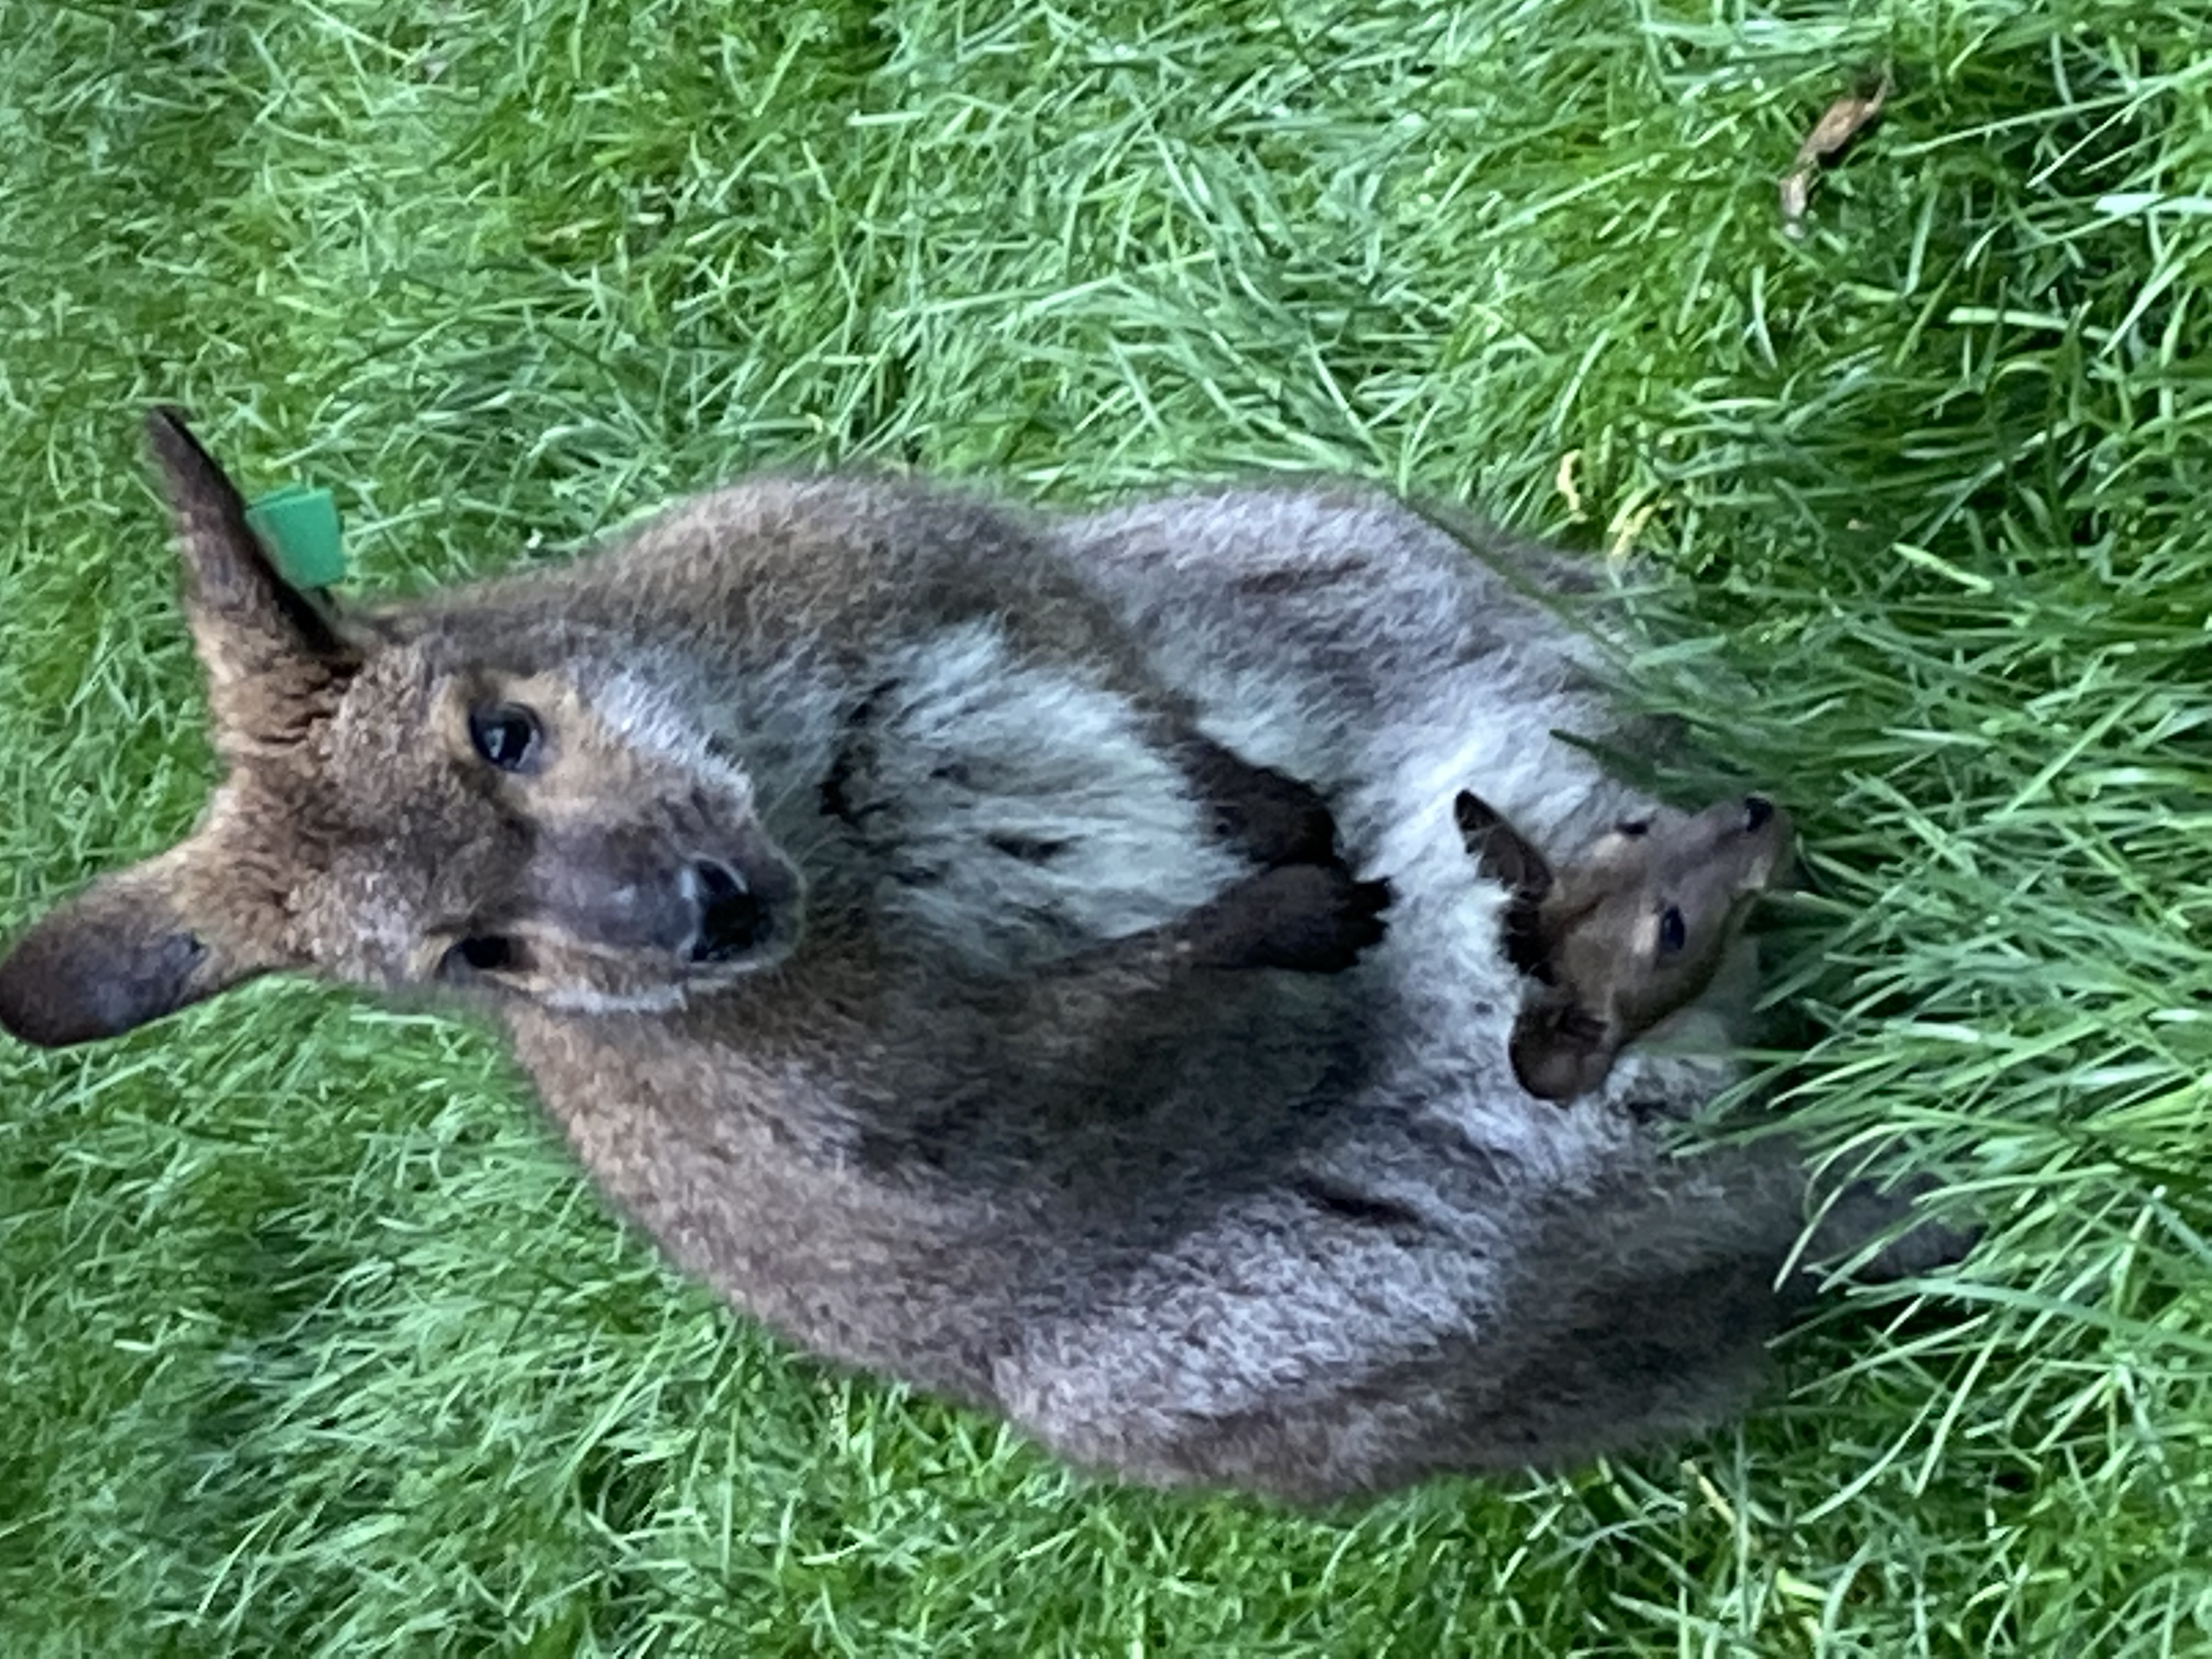 a female wallaby standing on her hind legs and looking slightly to the side. the head of a small joey is sticking out of her pouch.